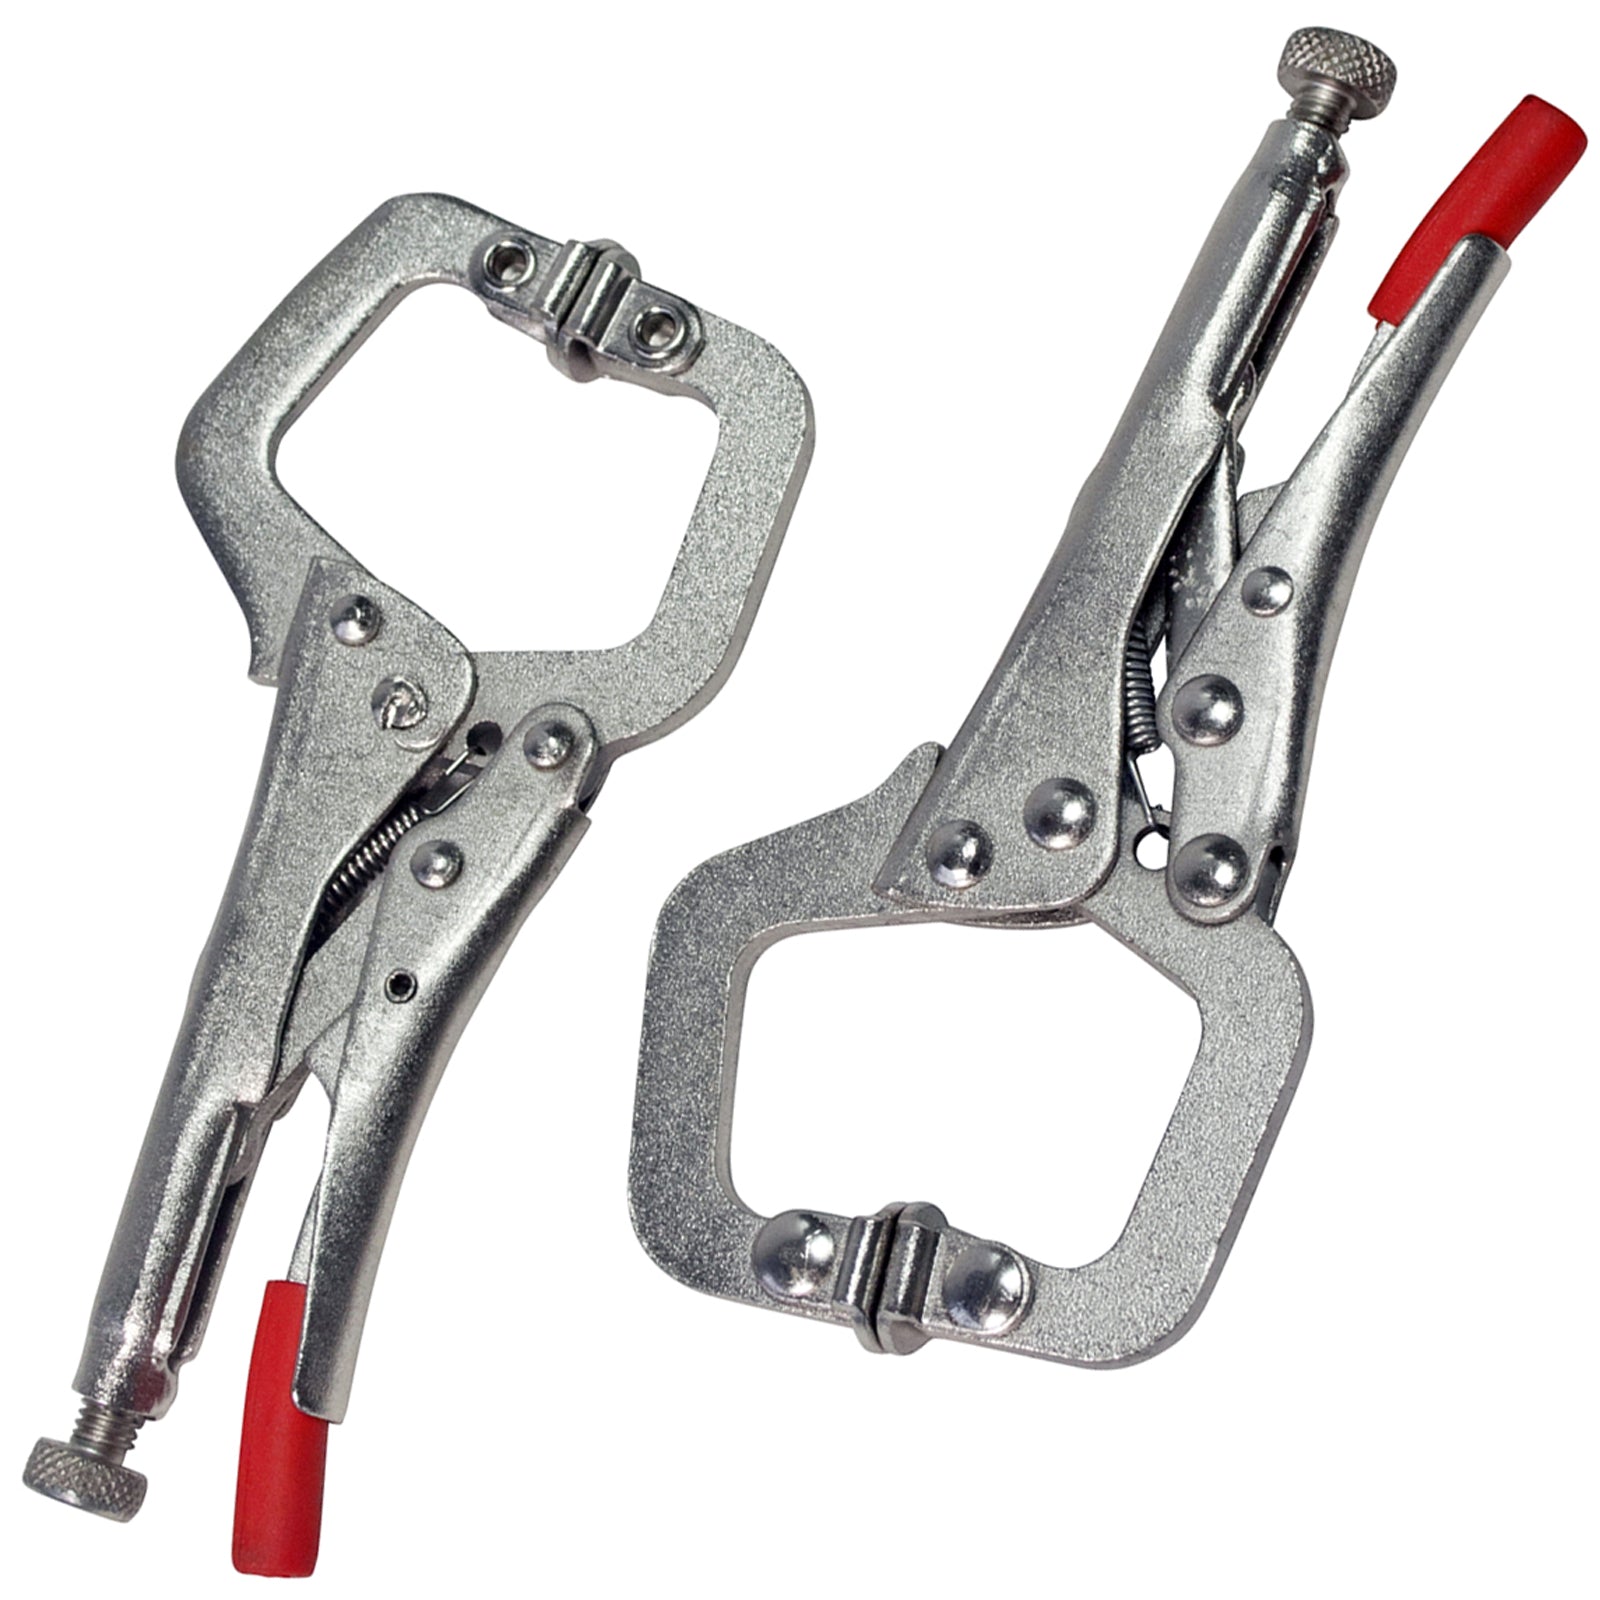 Amtech 2 Piece Mini C-Clamps 30mm Jaw Opening